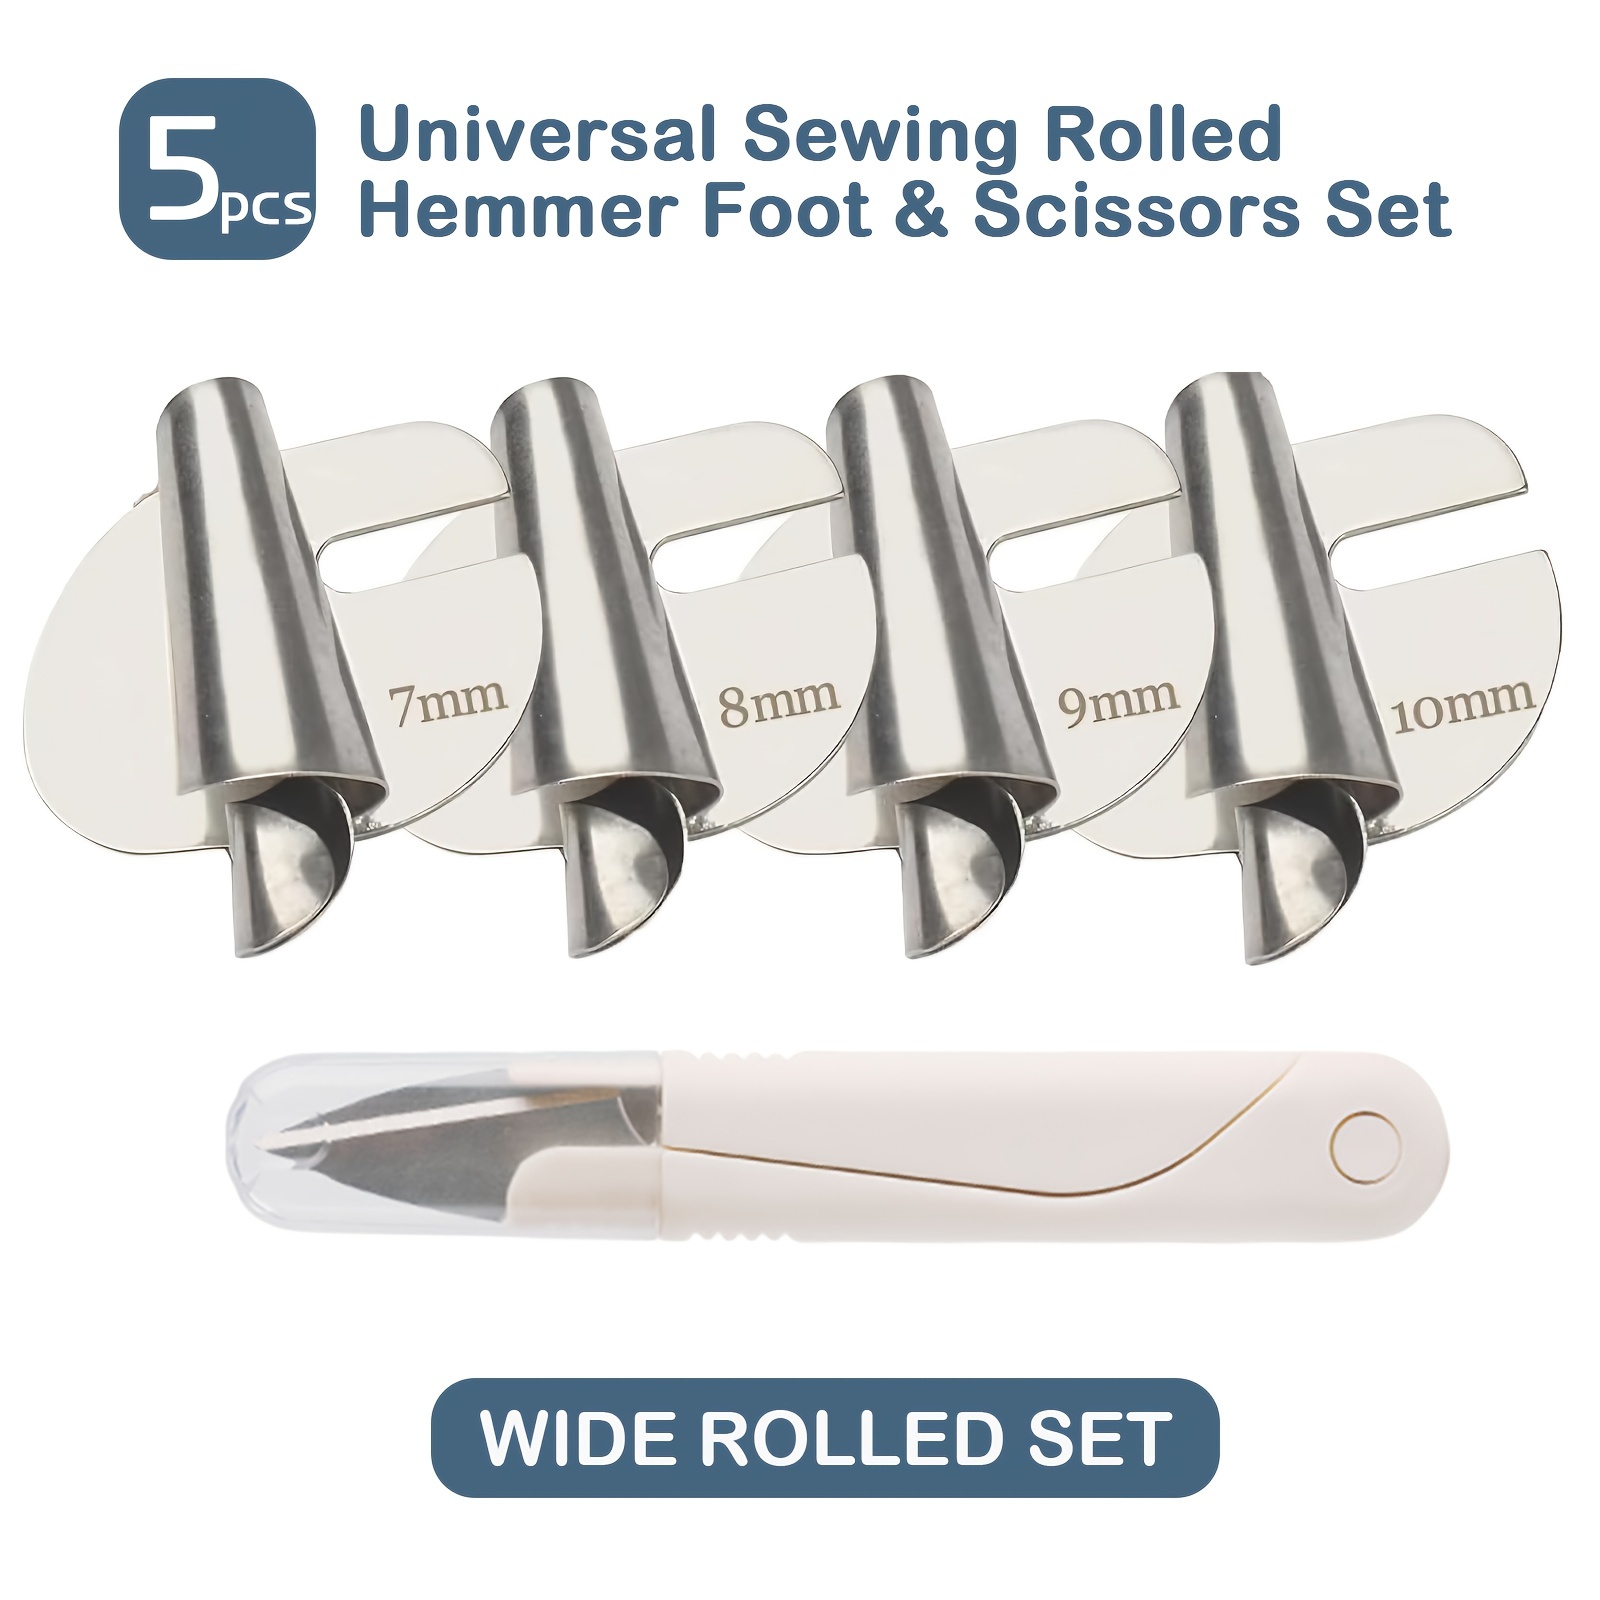 Sewing Rolled Hemmer Foot,Universal 3-10mm Wide Sewing Rolled Hem Presser  Foot,Home Industrial Curved Scroll Hemmer Foot,Rolled Hem Pressure Foot